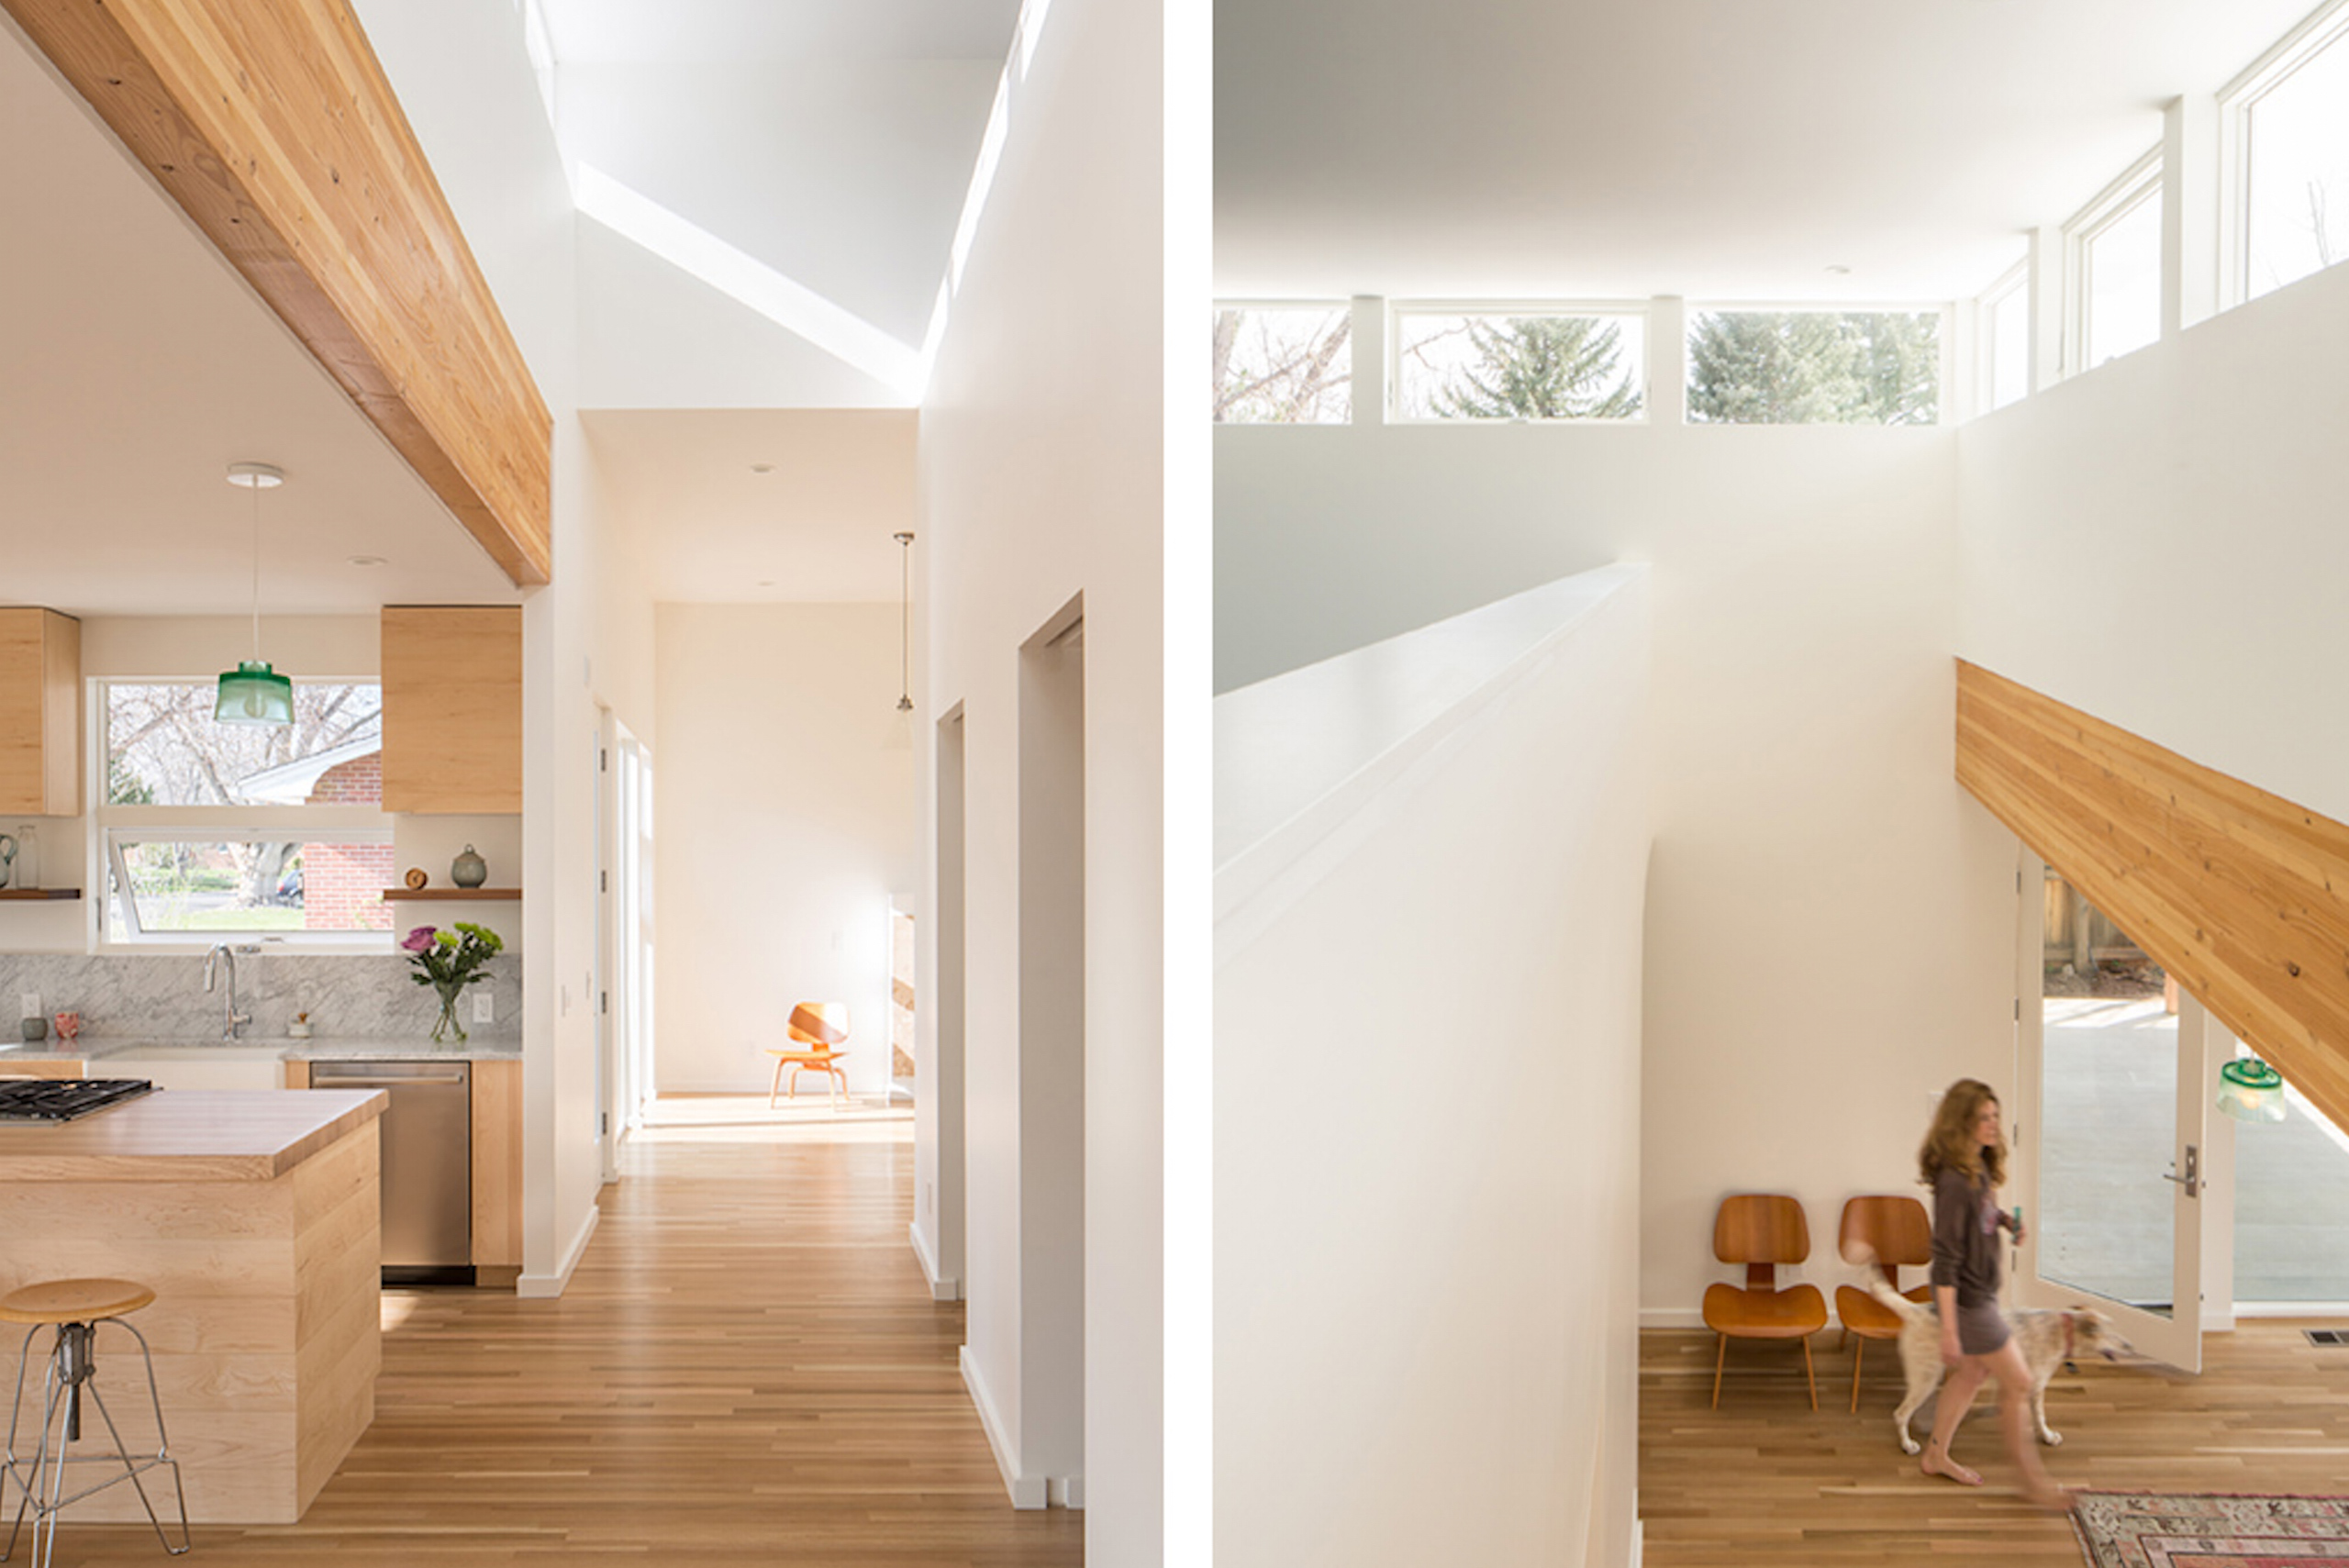 Interior view of Reduce Reuse Remodel by Renée del Gaudio Architecture